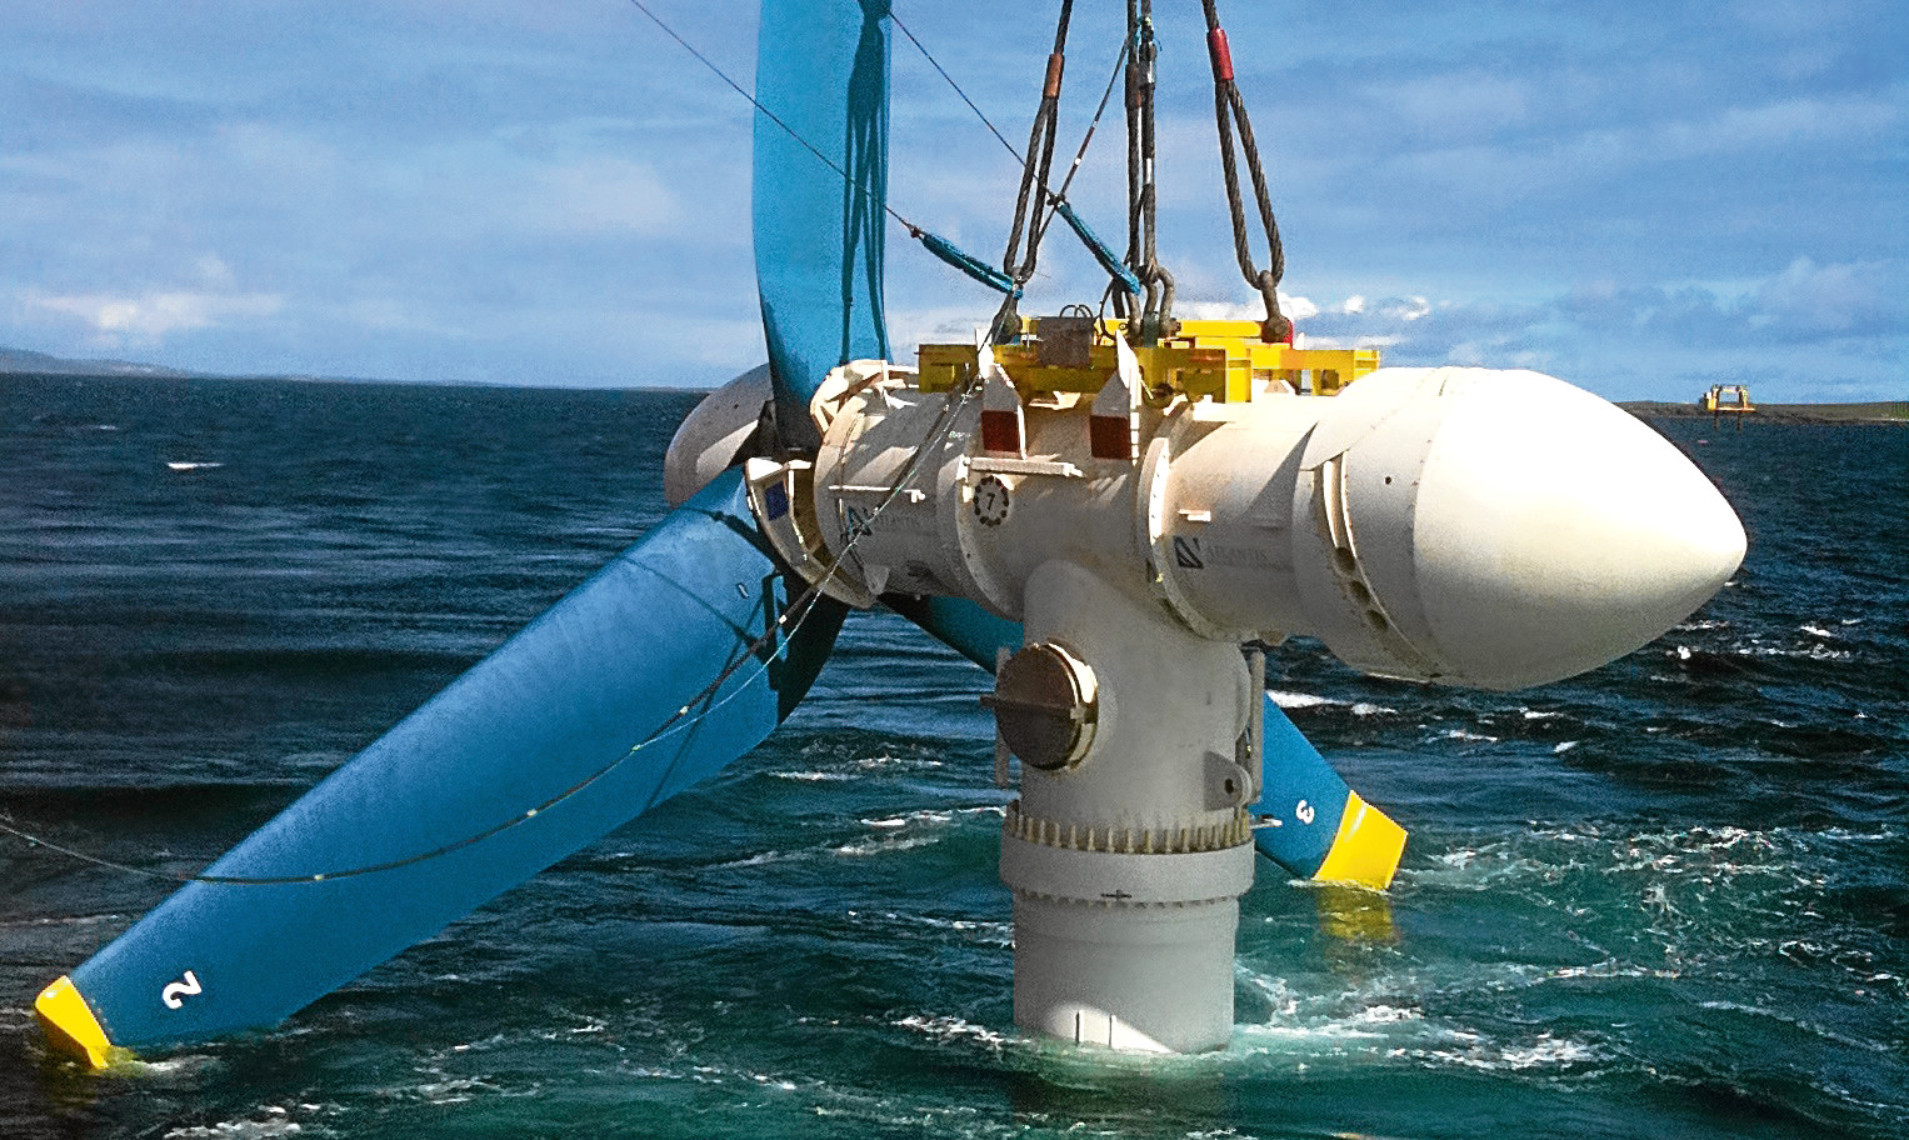 An Atlantis tidal turbine is lowered into the water